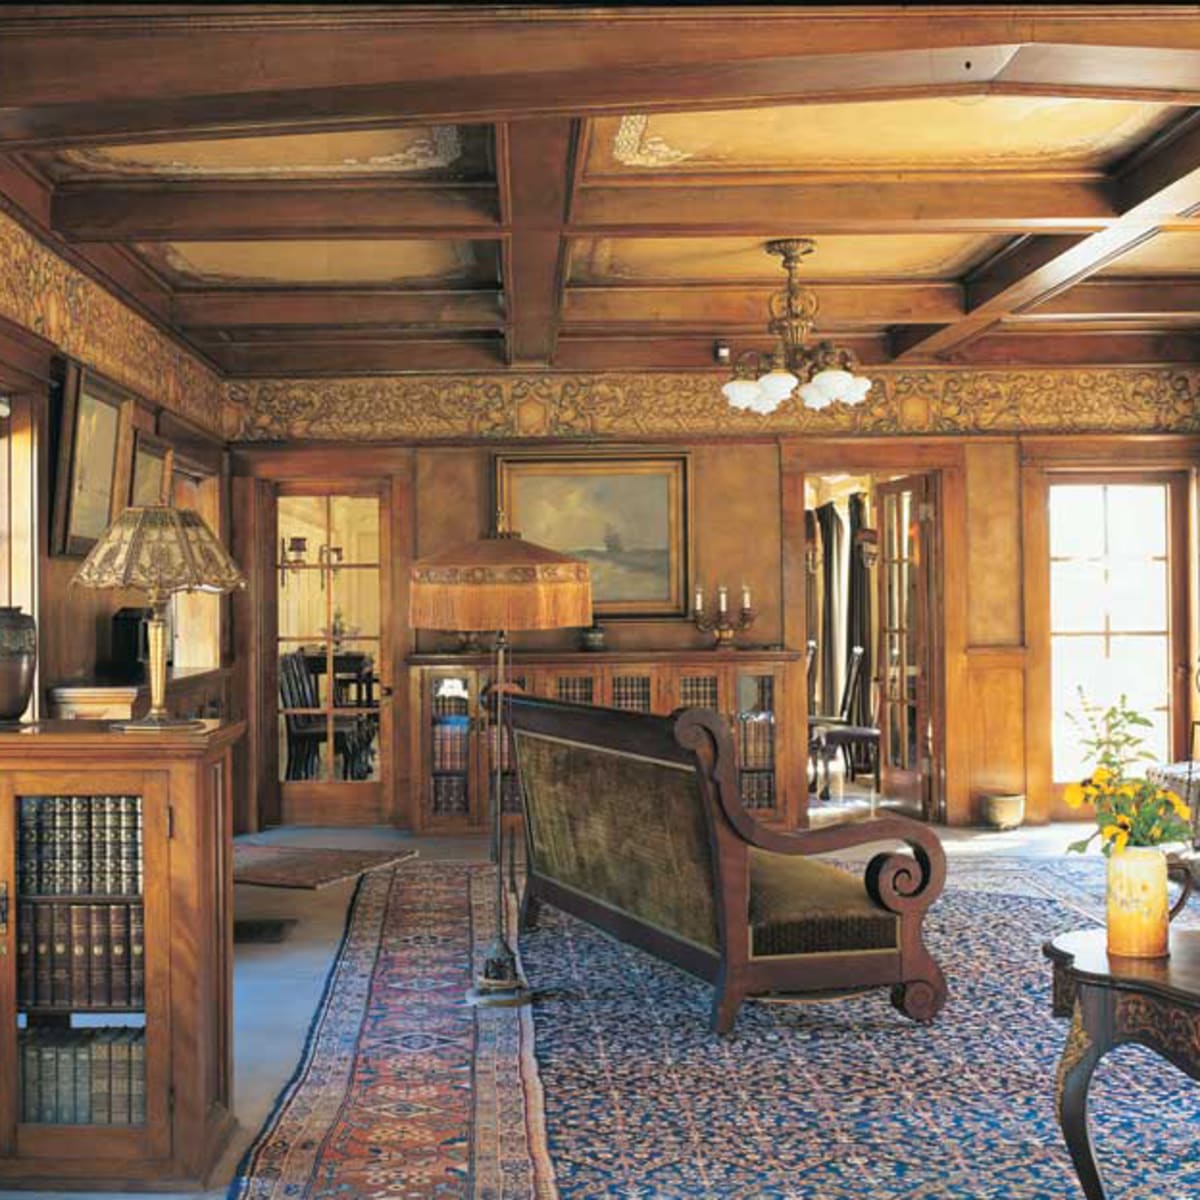 Ceiling Beams In Between Design For The Arts Crafts House Arts Crafts Homes Online